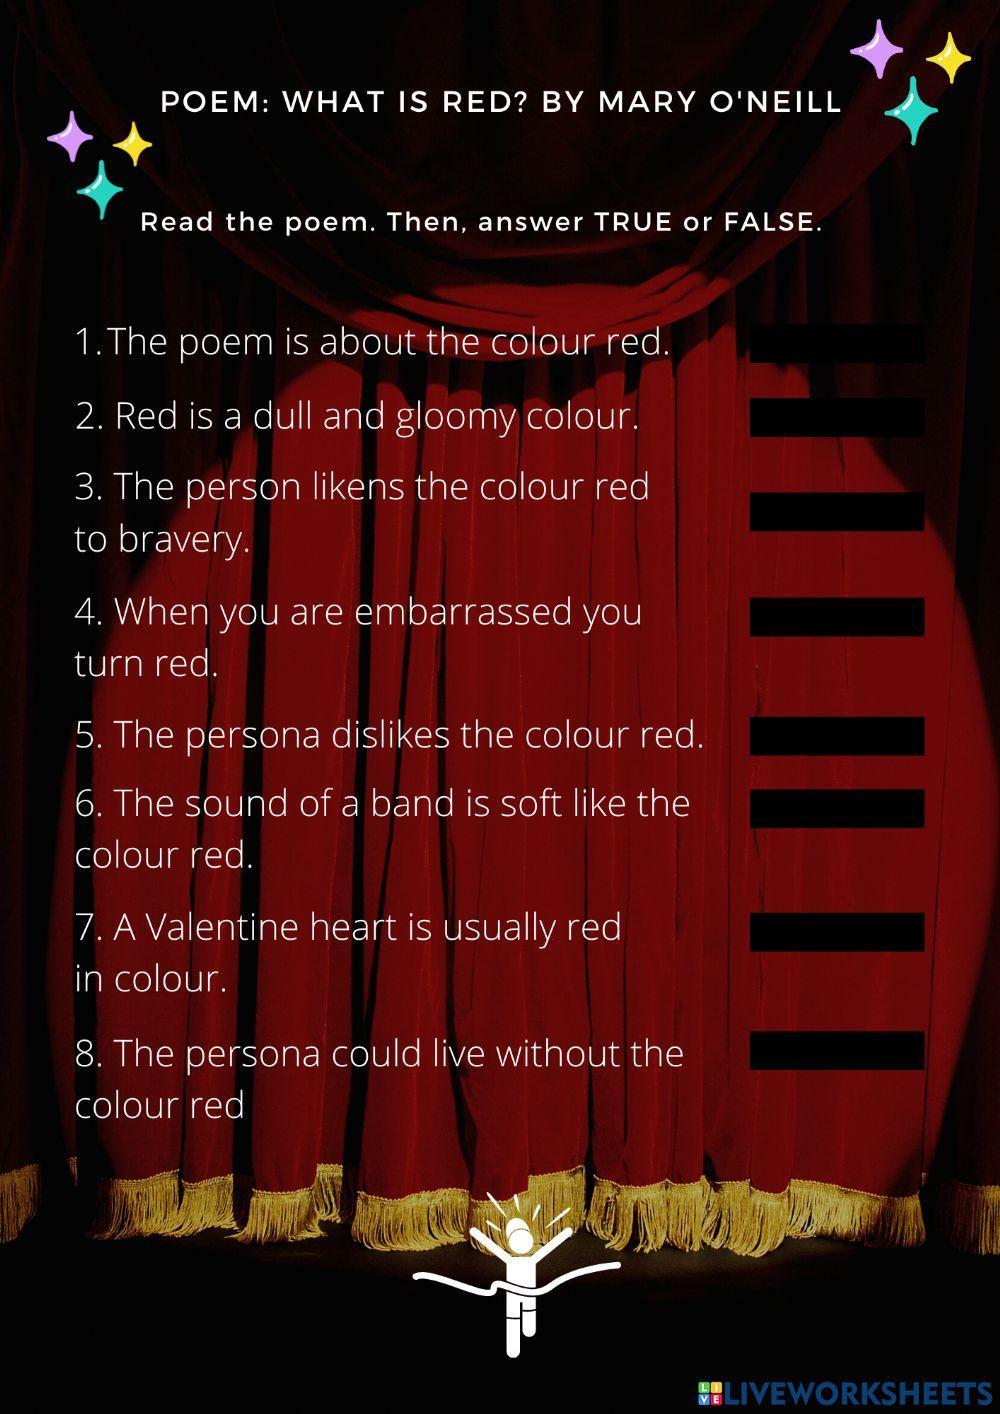 Poem: What is Red?